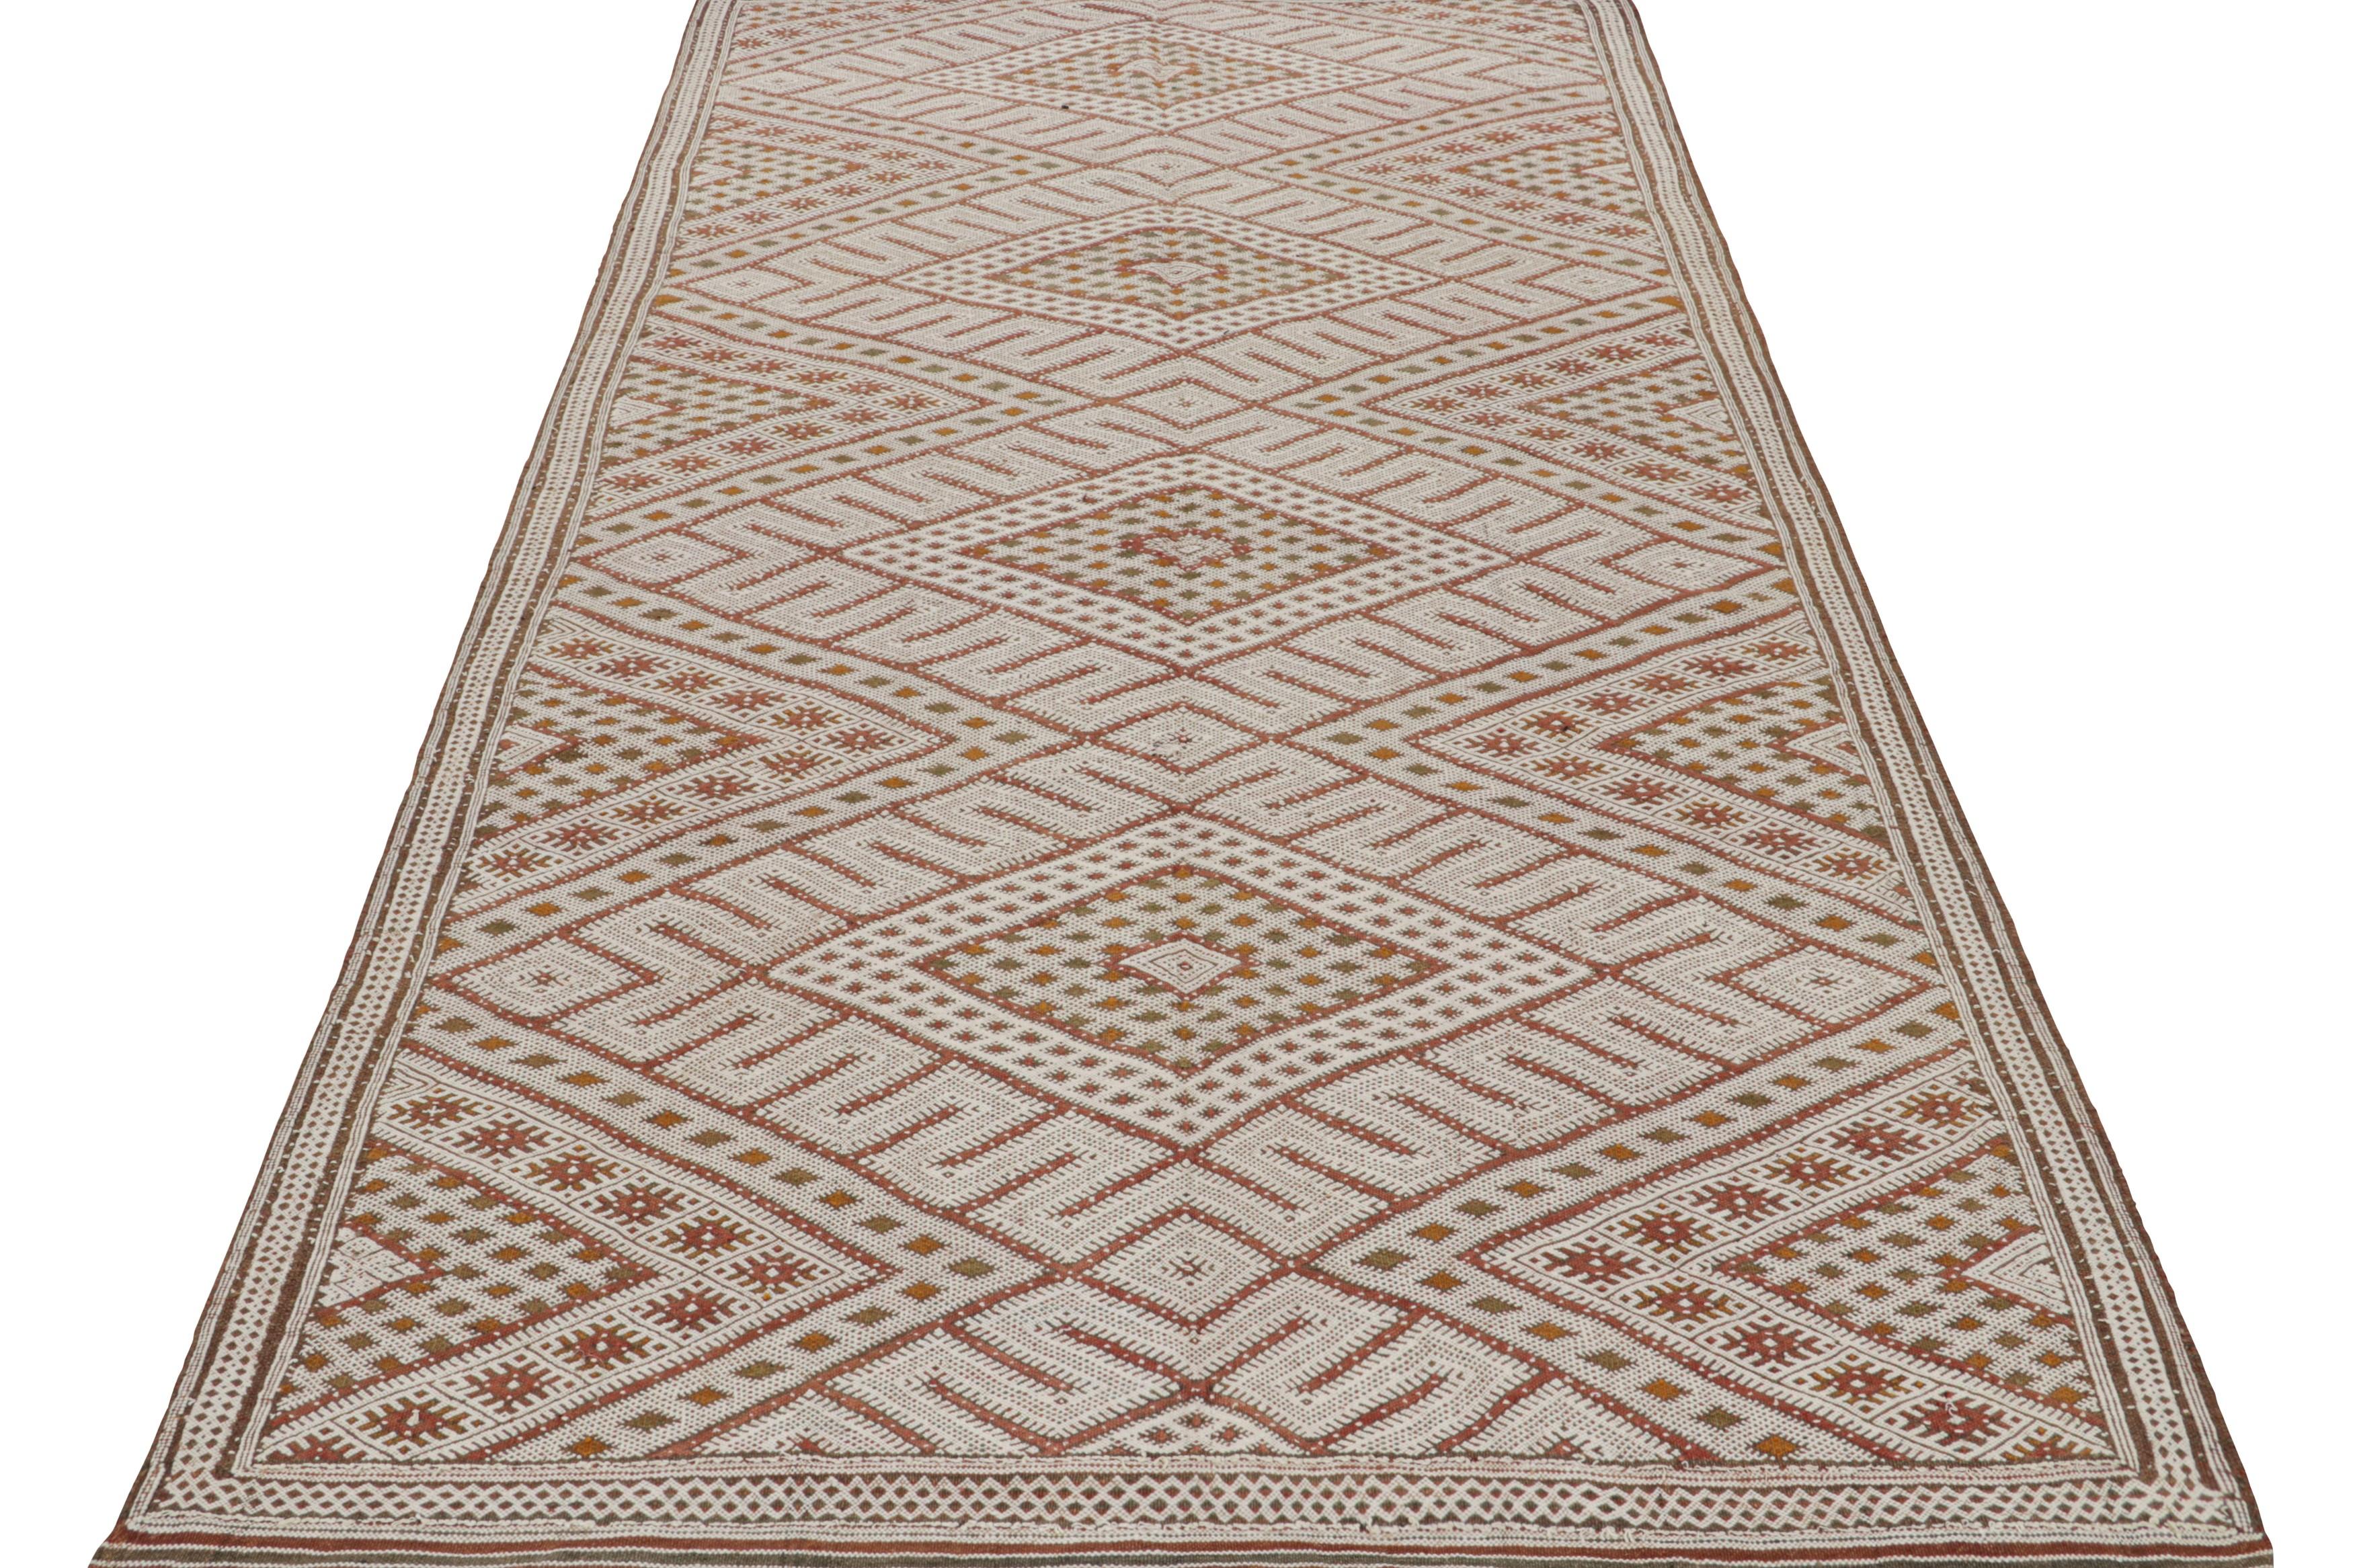 Hand-Woven Vintage Zayane Moroccan Kilim in Red & White Tribal Patterns by Rug & Kilim For Sale